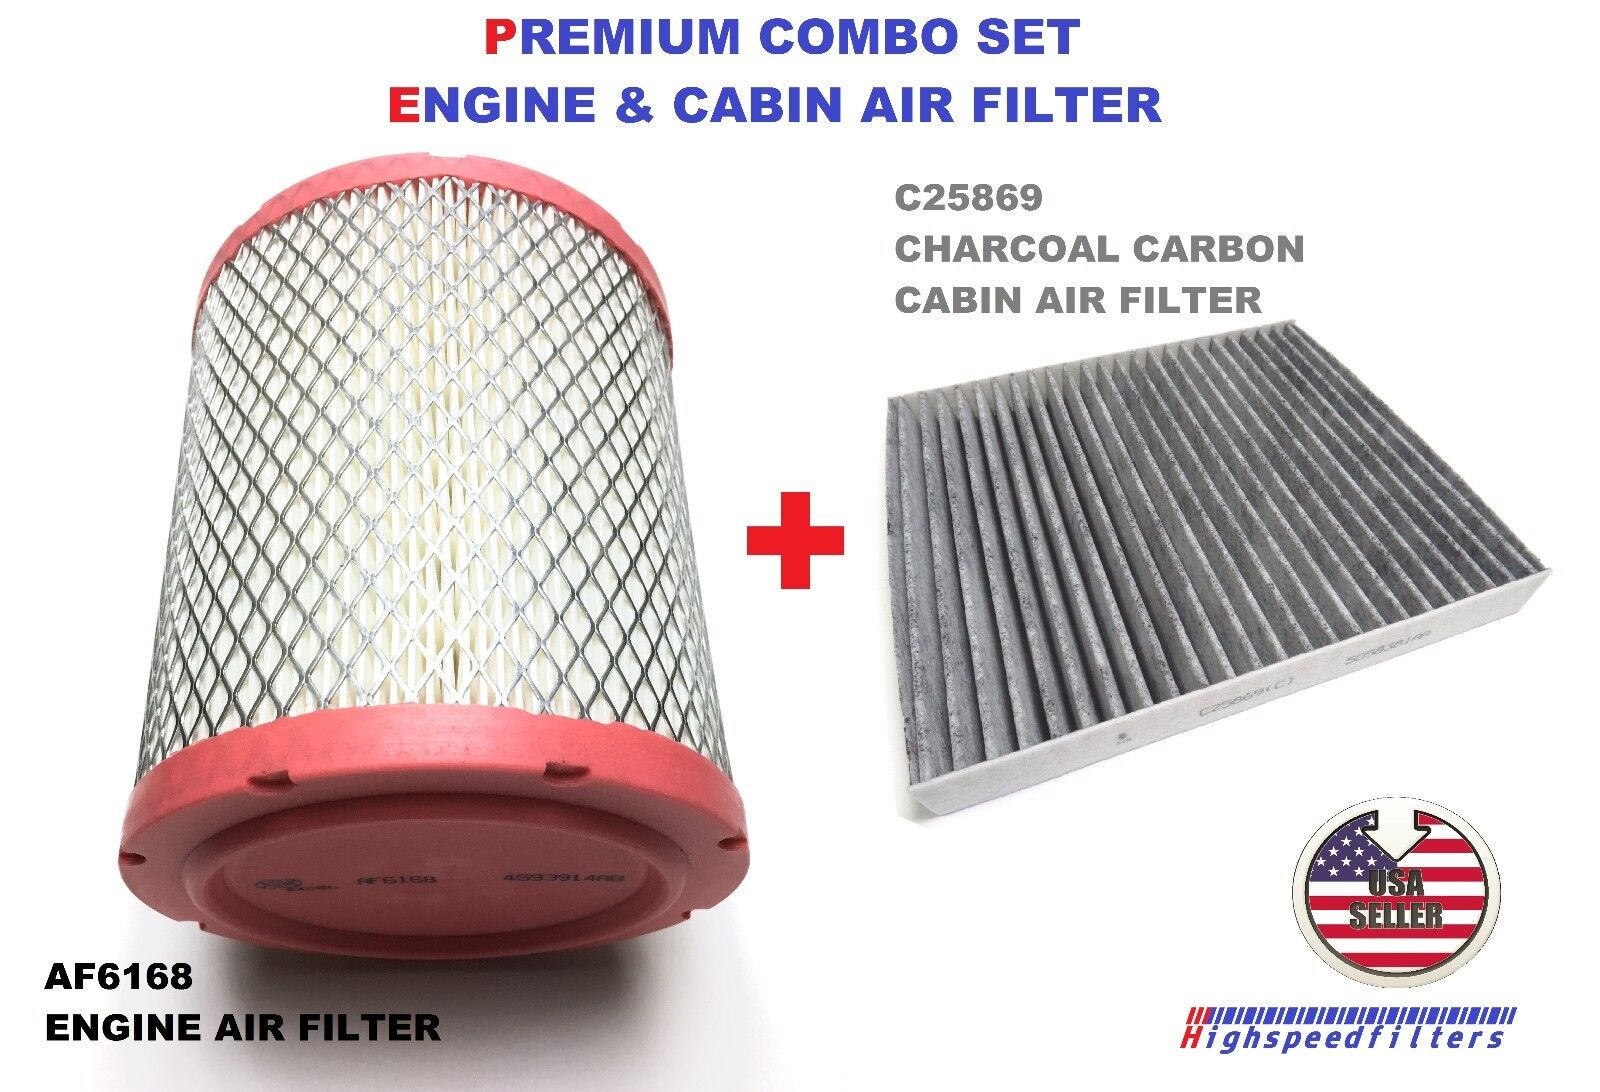 AF6168 C25869 ENGINE & CHARCOAL CABIN AIR FILTER COMBO FOR JEEP COMPASS PATRIOT